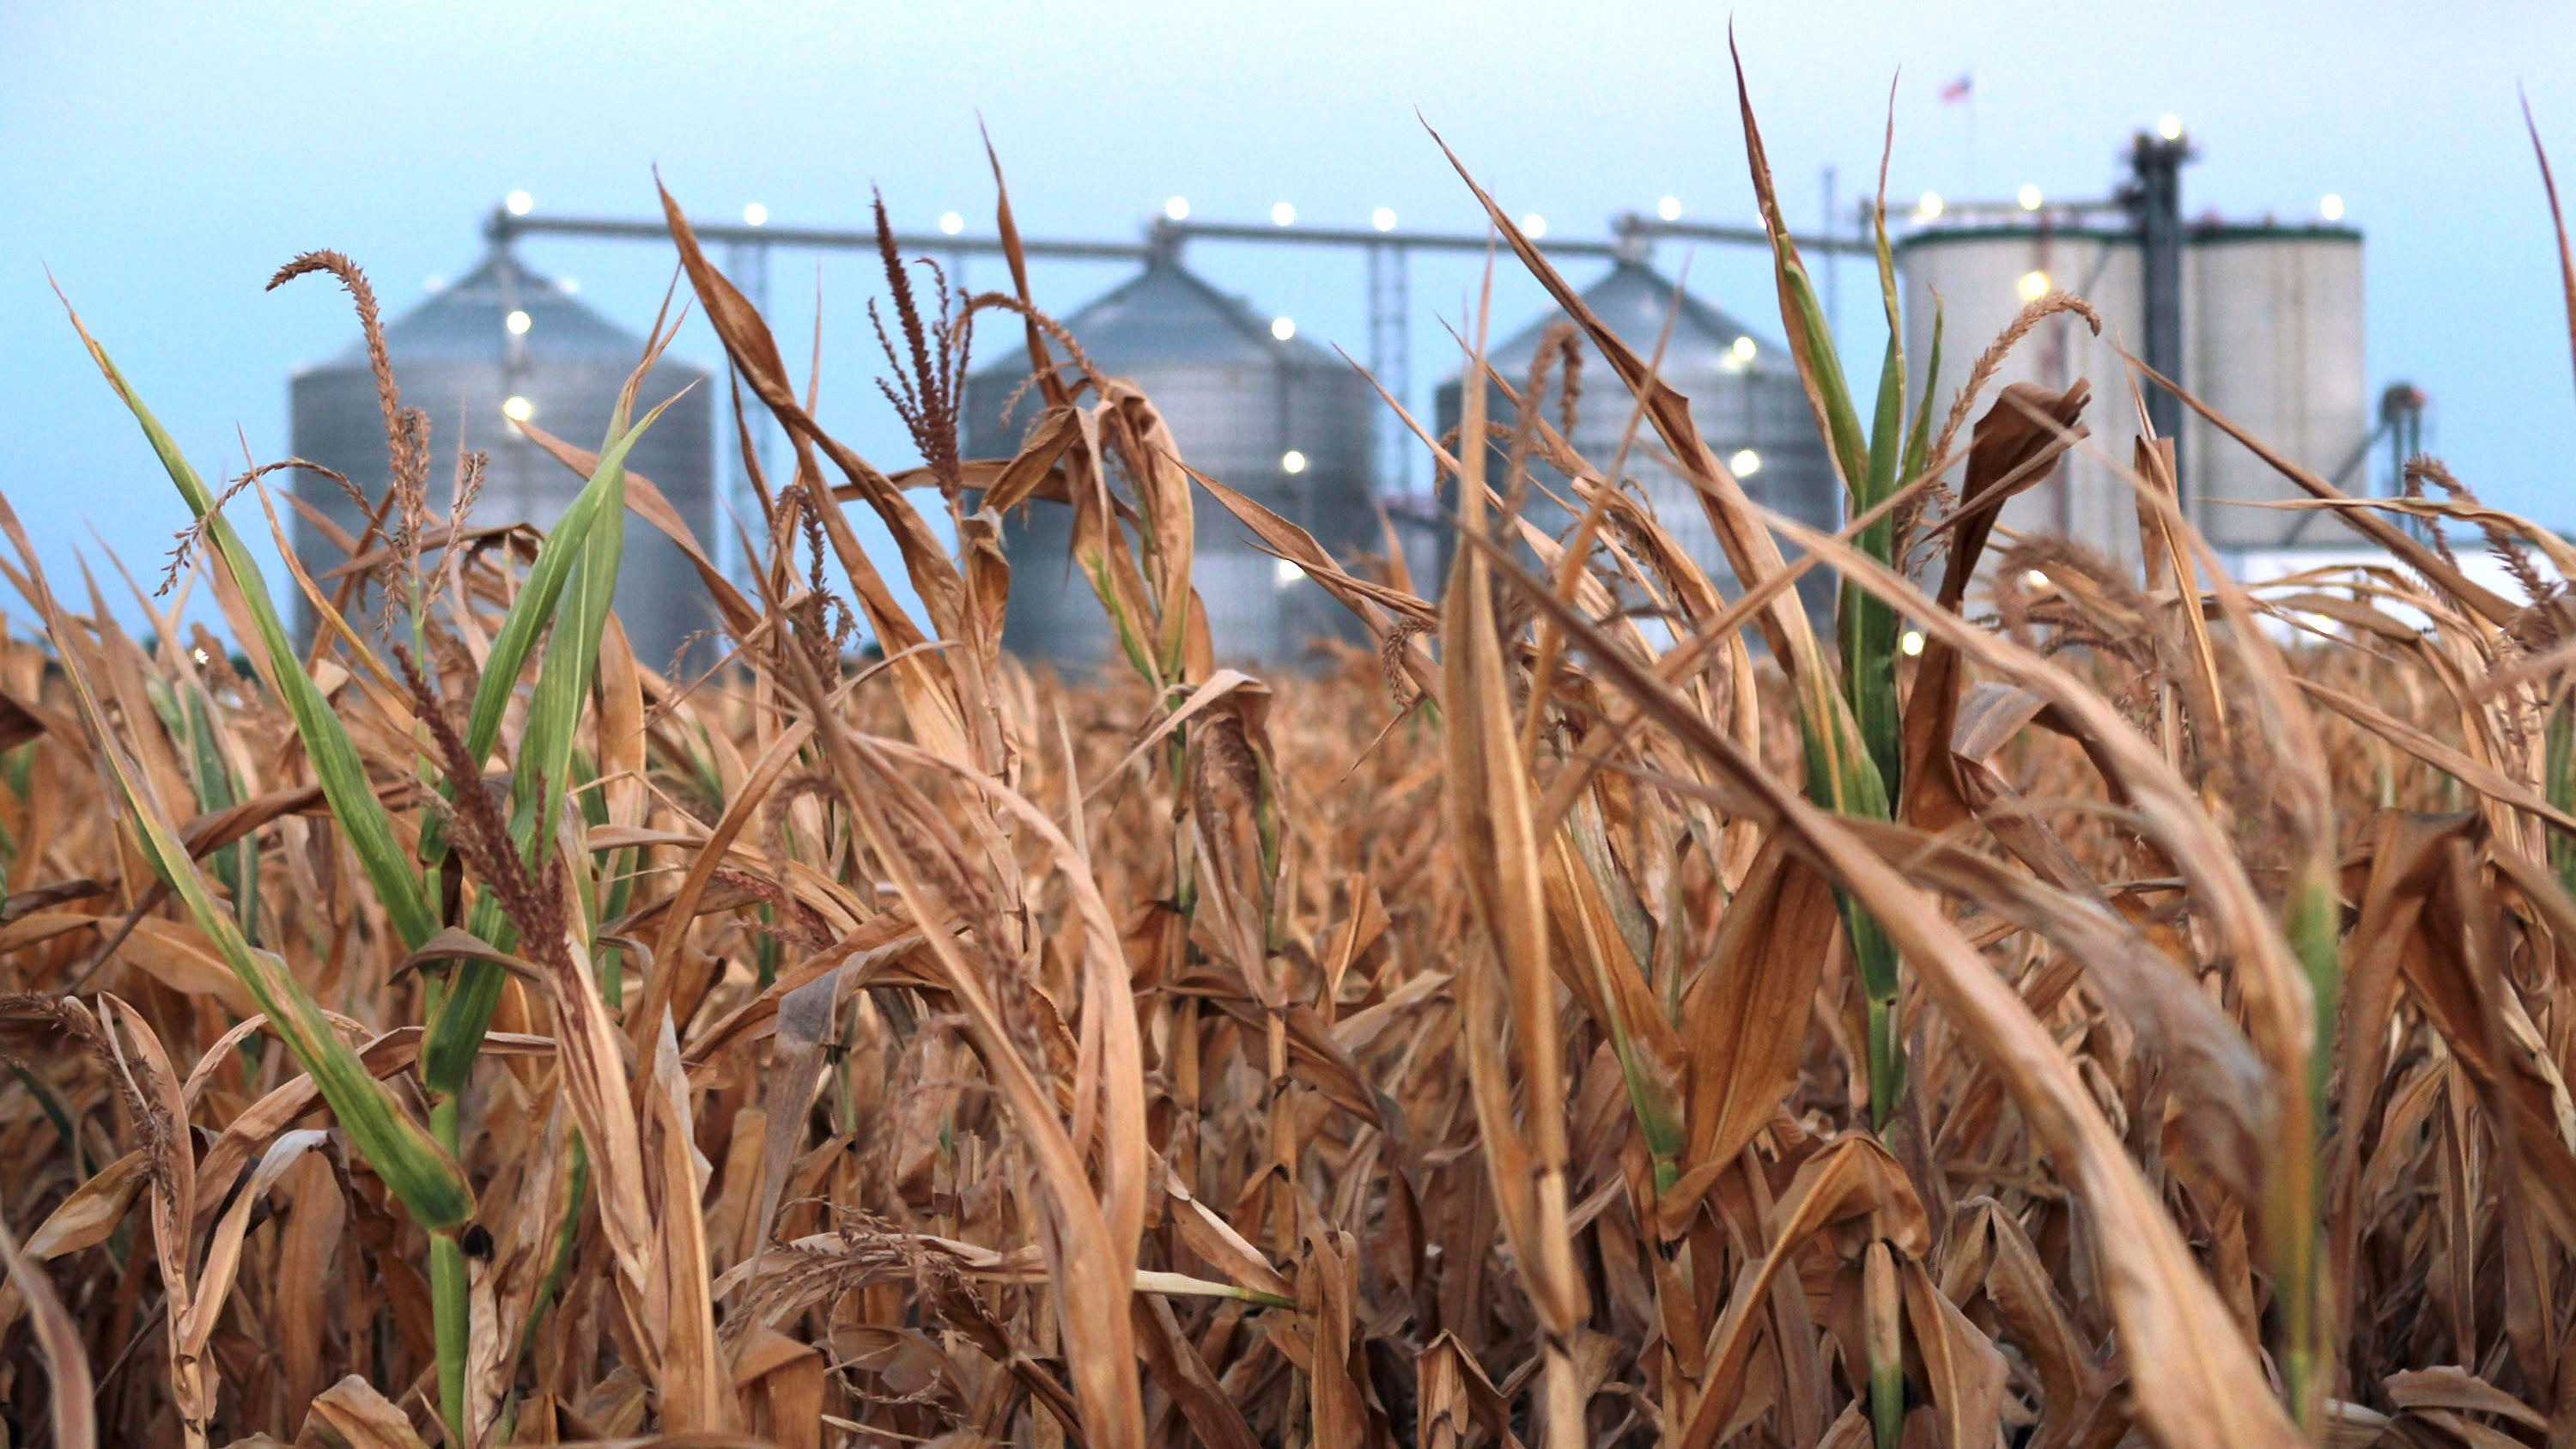 A field of corn in front of an ethanol plant in Illinois.